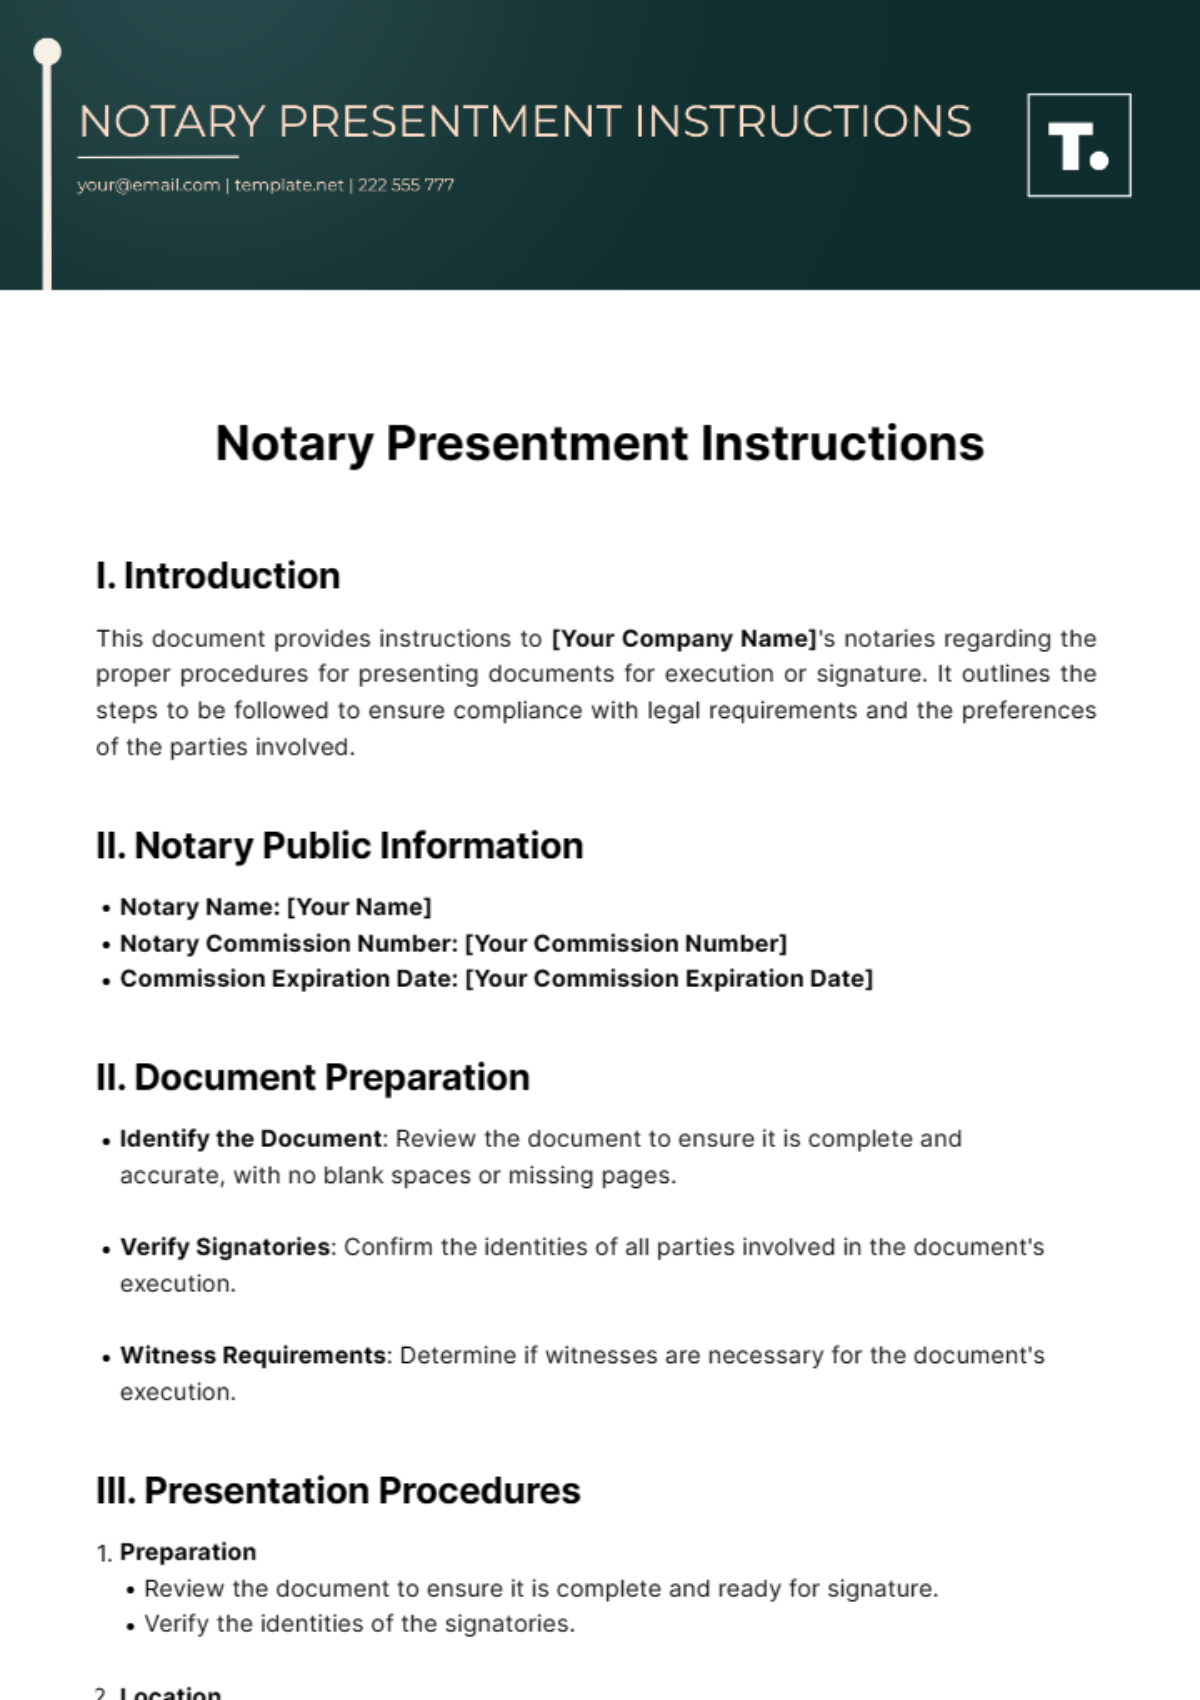 Free Notary Presentment Instructions Template